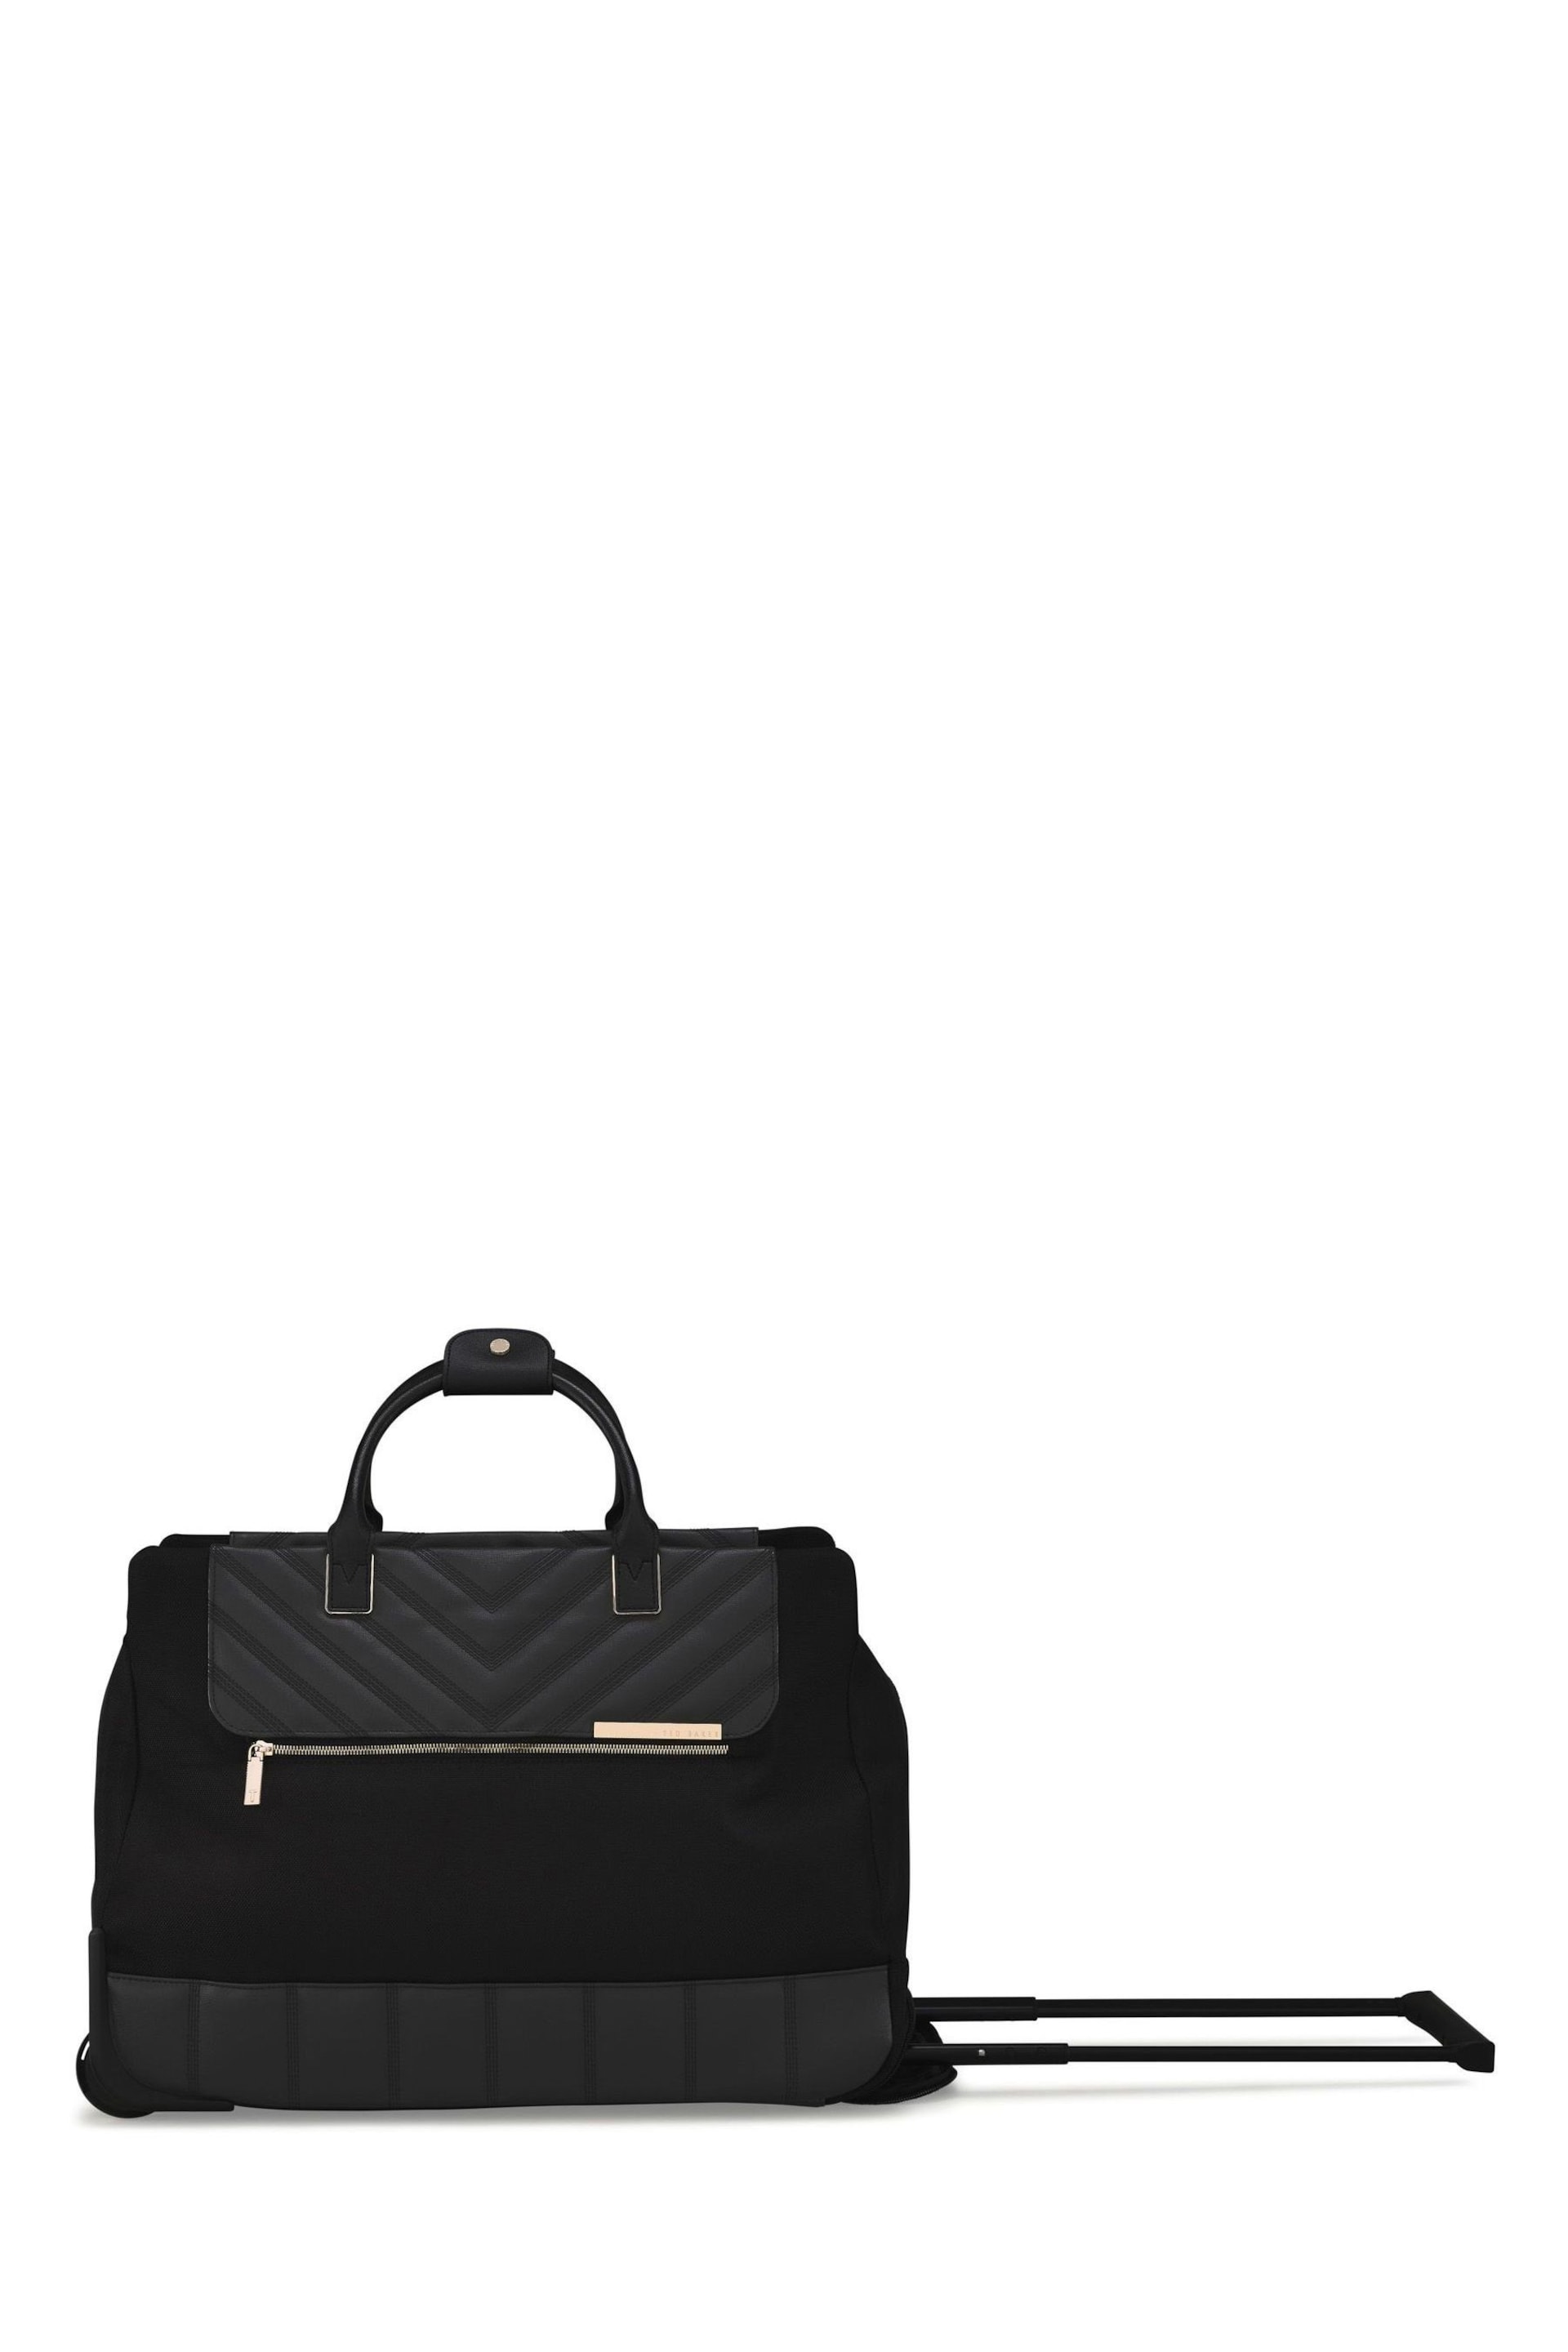 Ted Baker Black Albany Eco Small Trolley Duffle Bag - Image 1 of 3